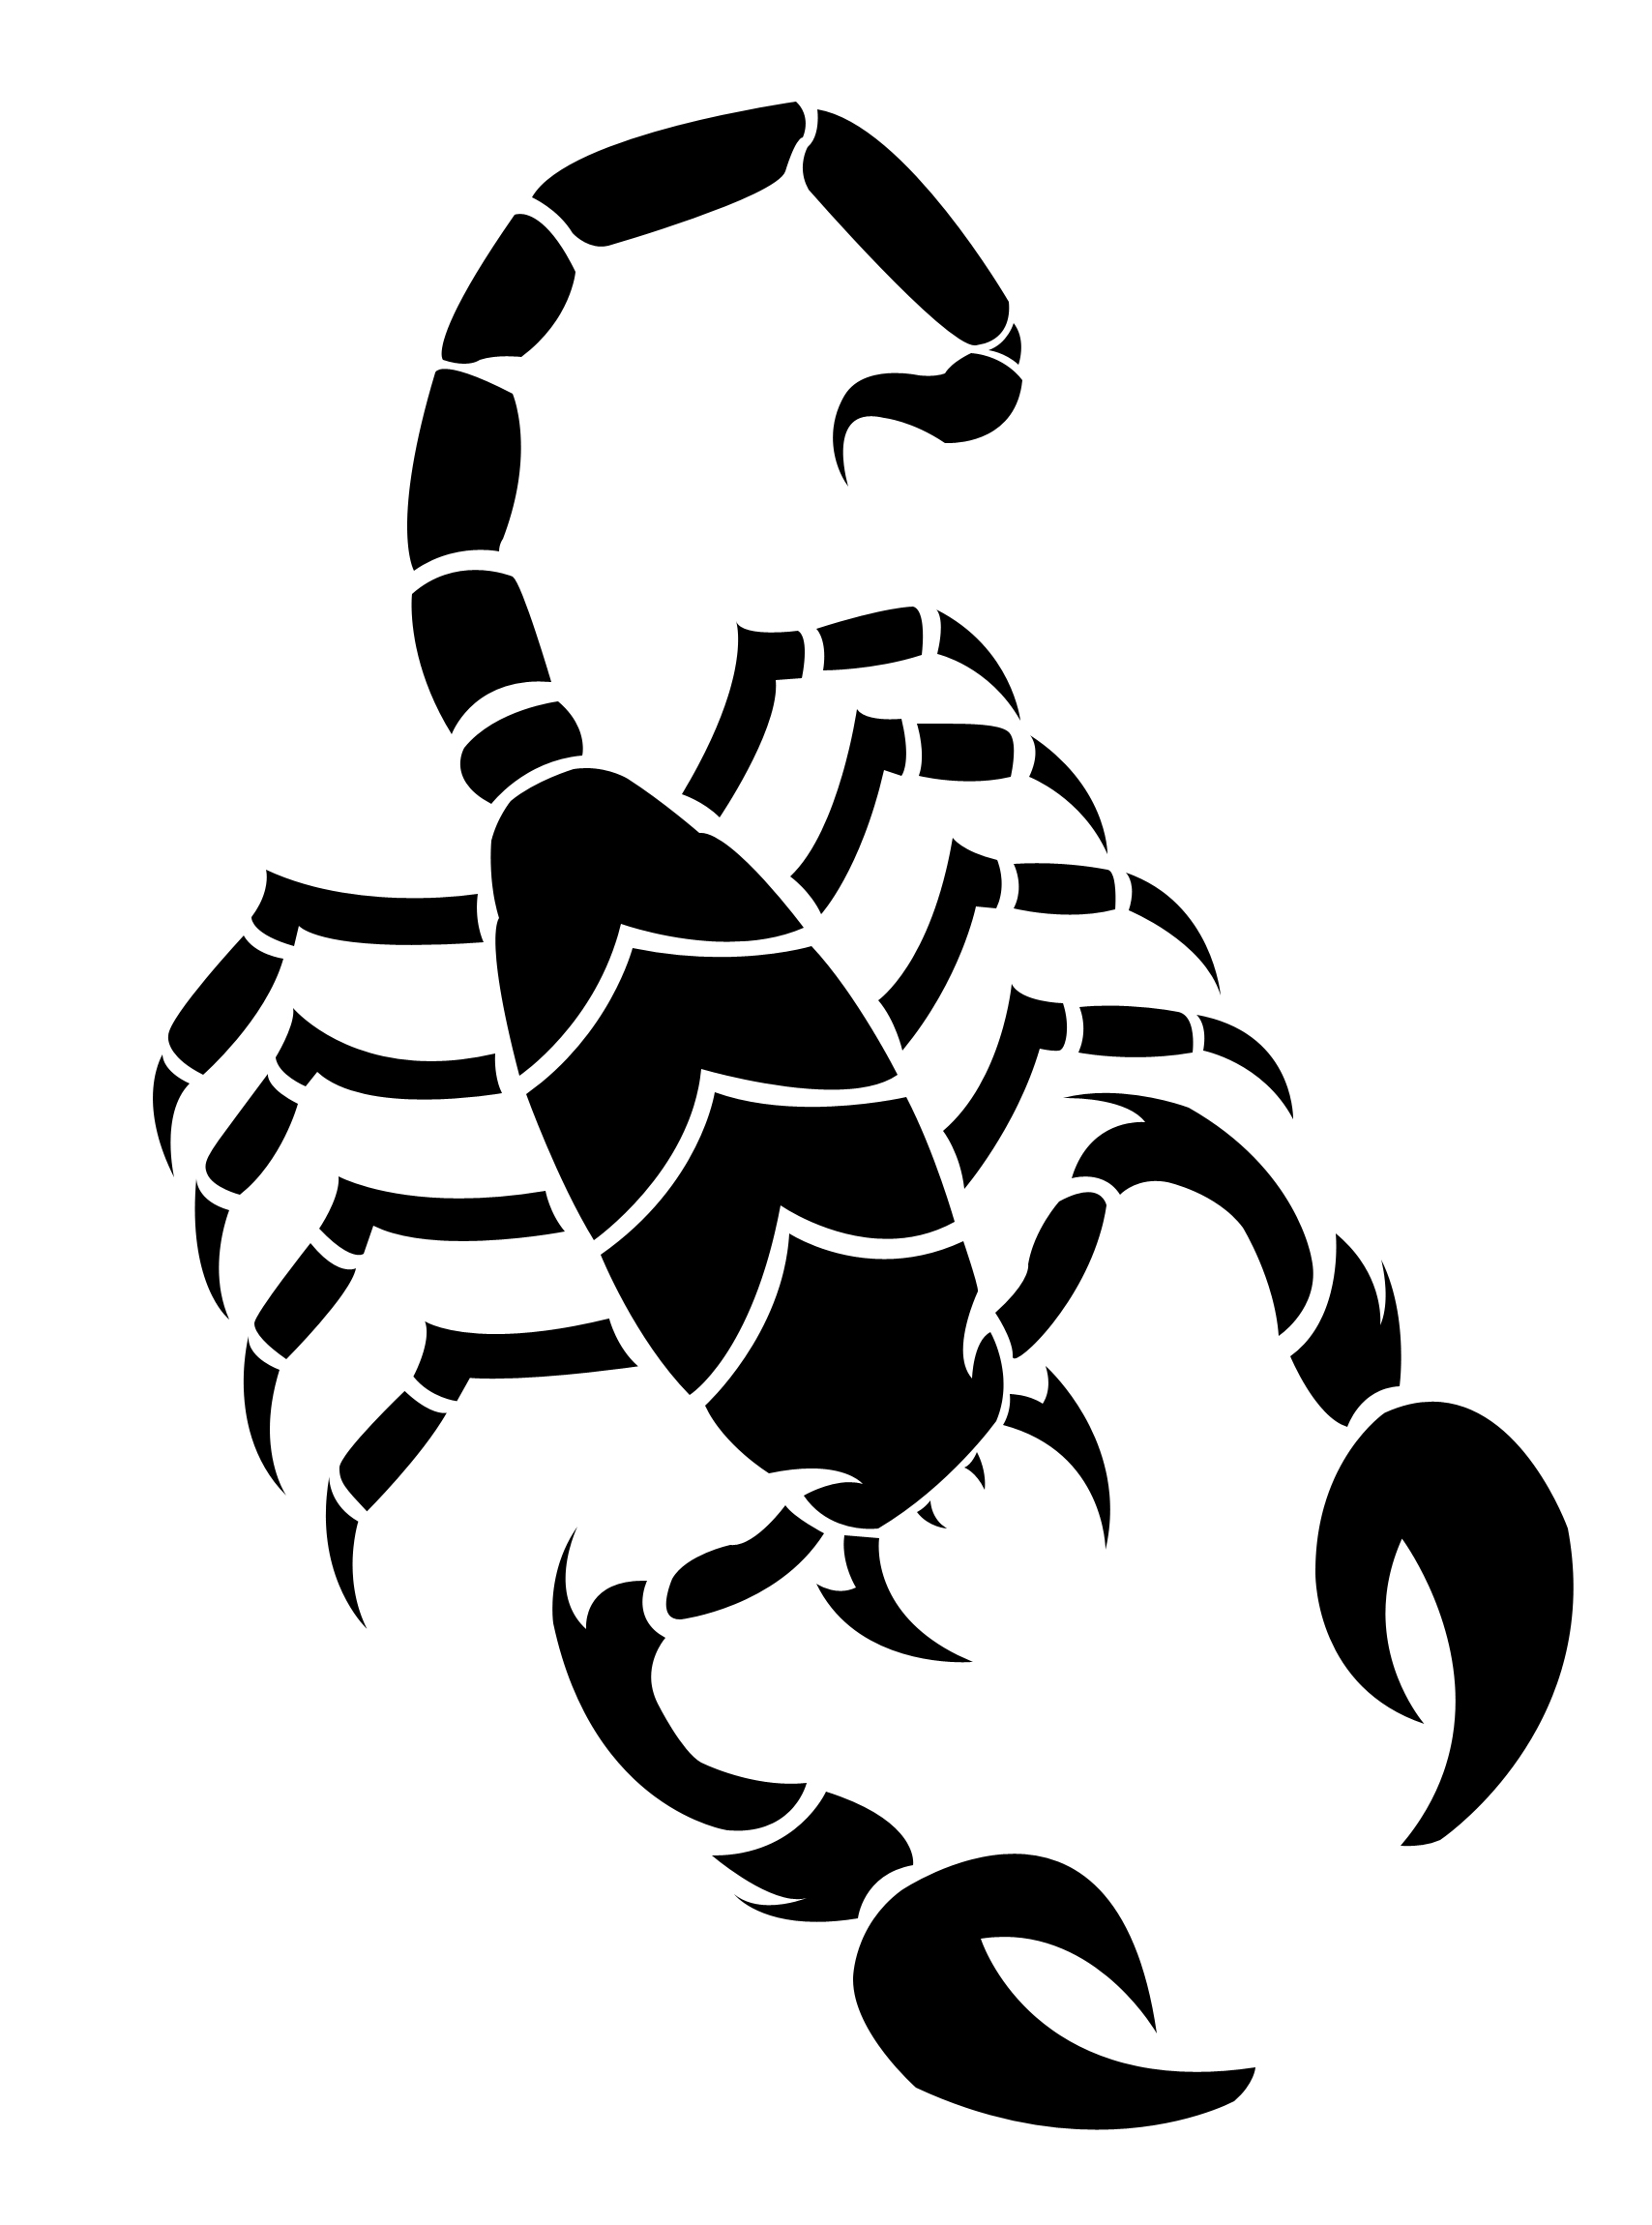 Scorpion drawing clipart